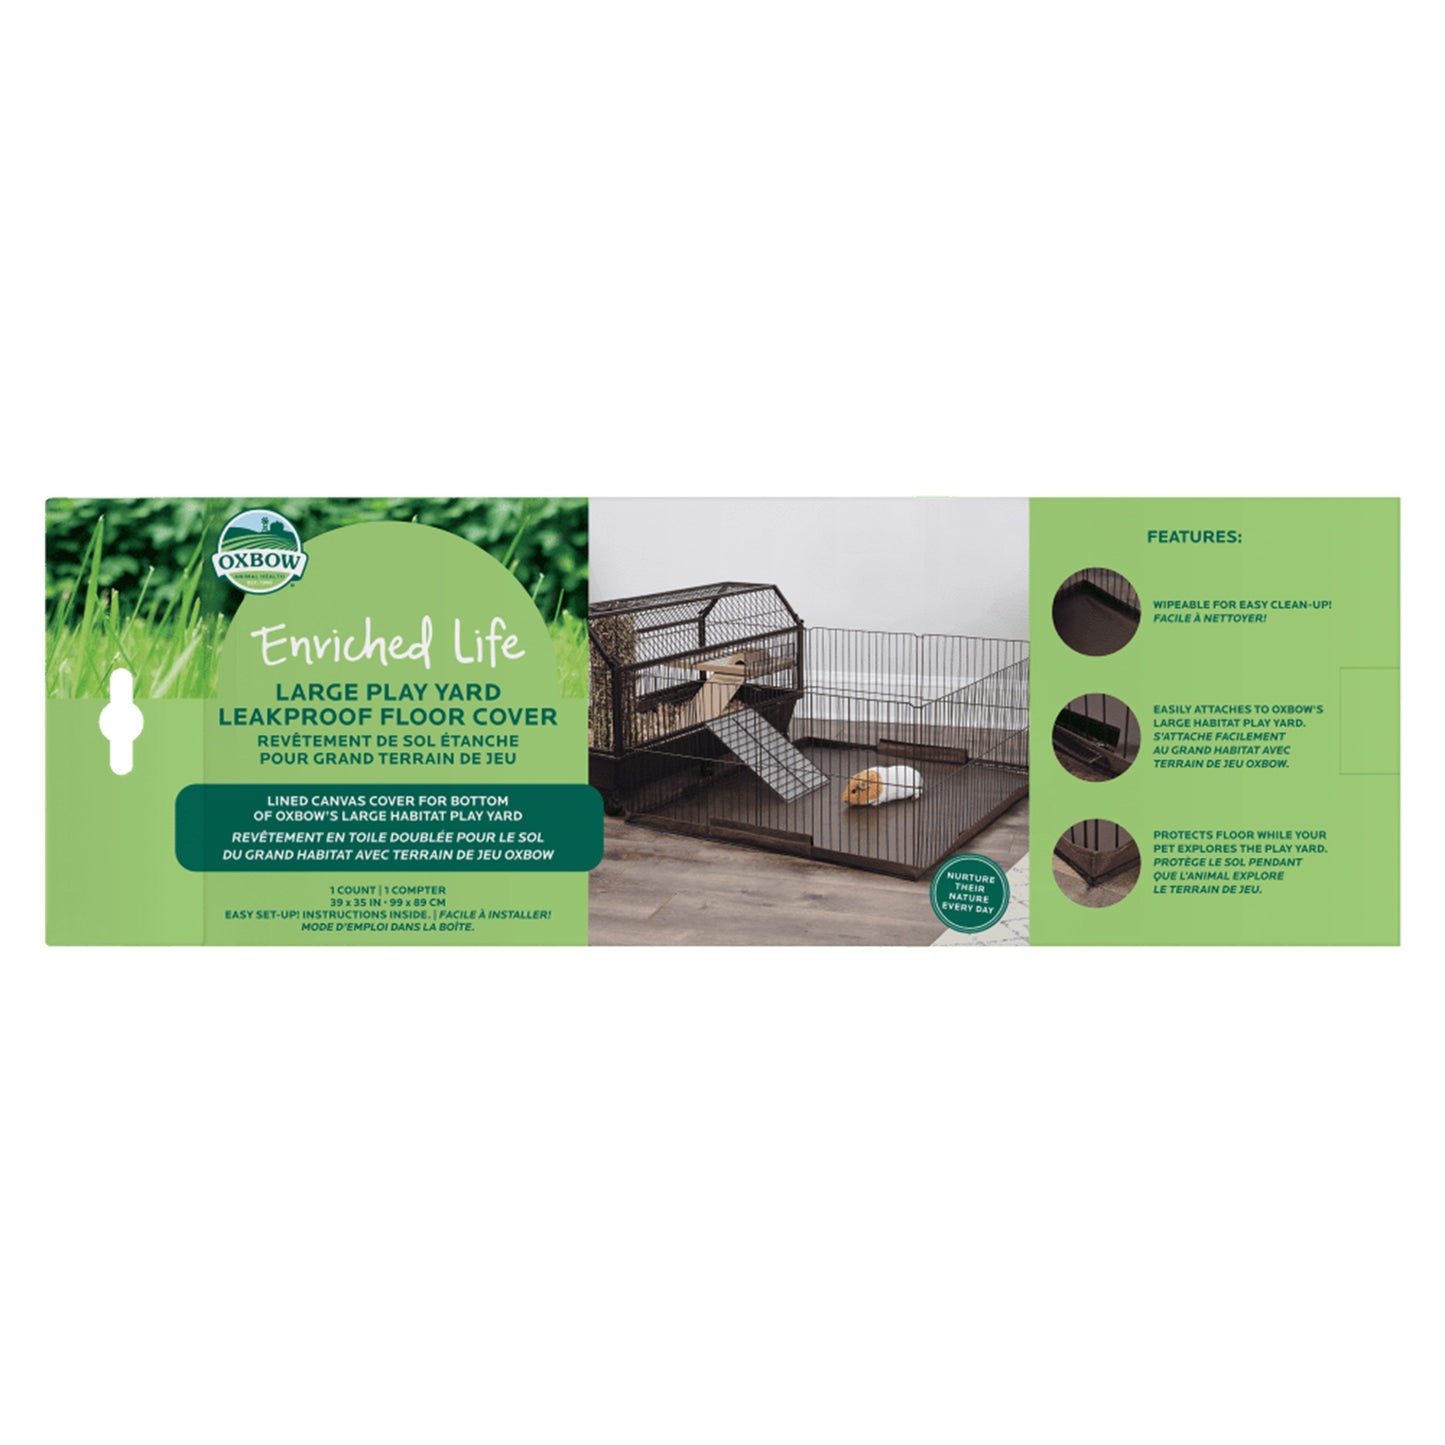 Oxbow Animal Health Enriched Life Leakproof Play Yard Floor Cover, LG, Oxbow